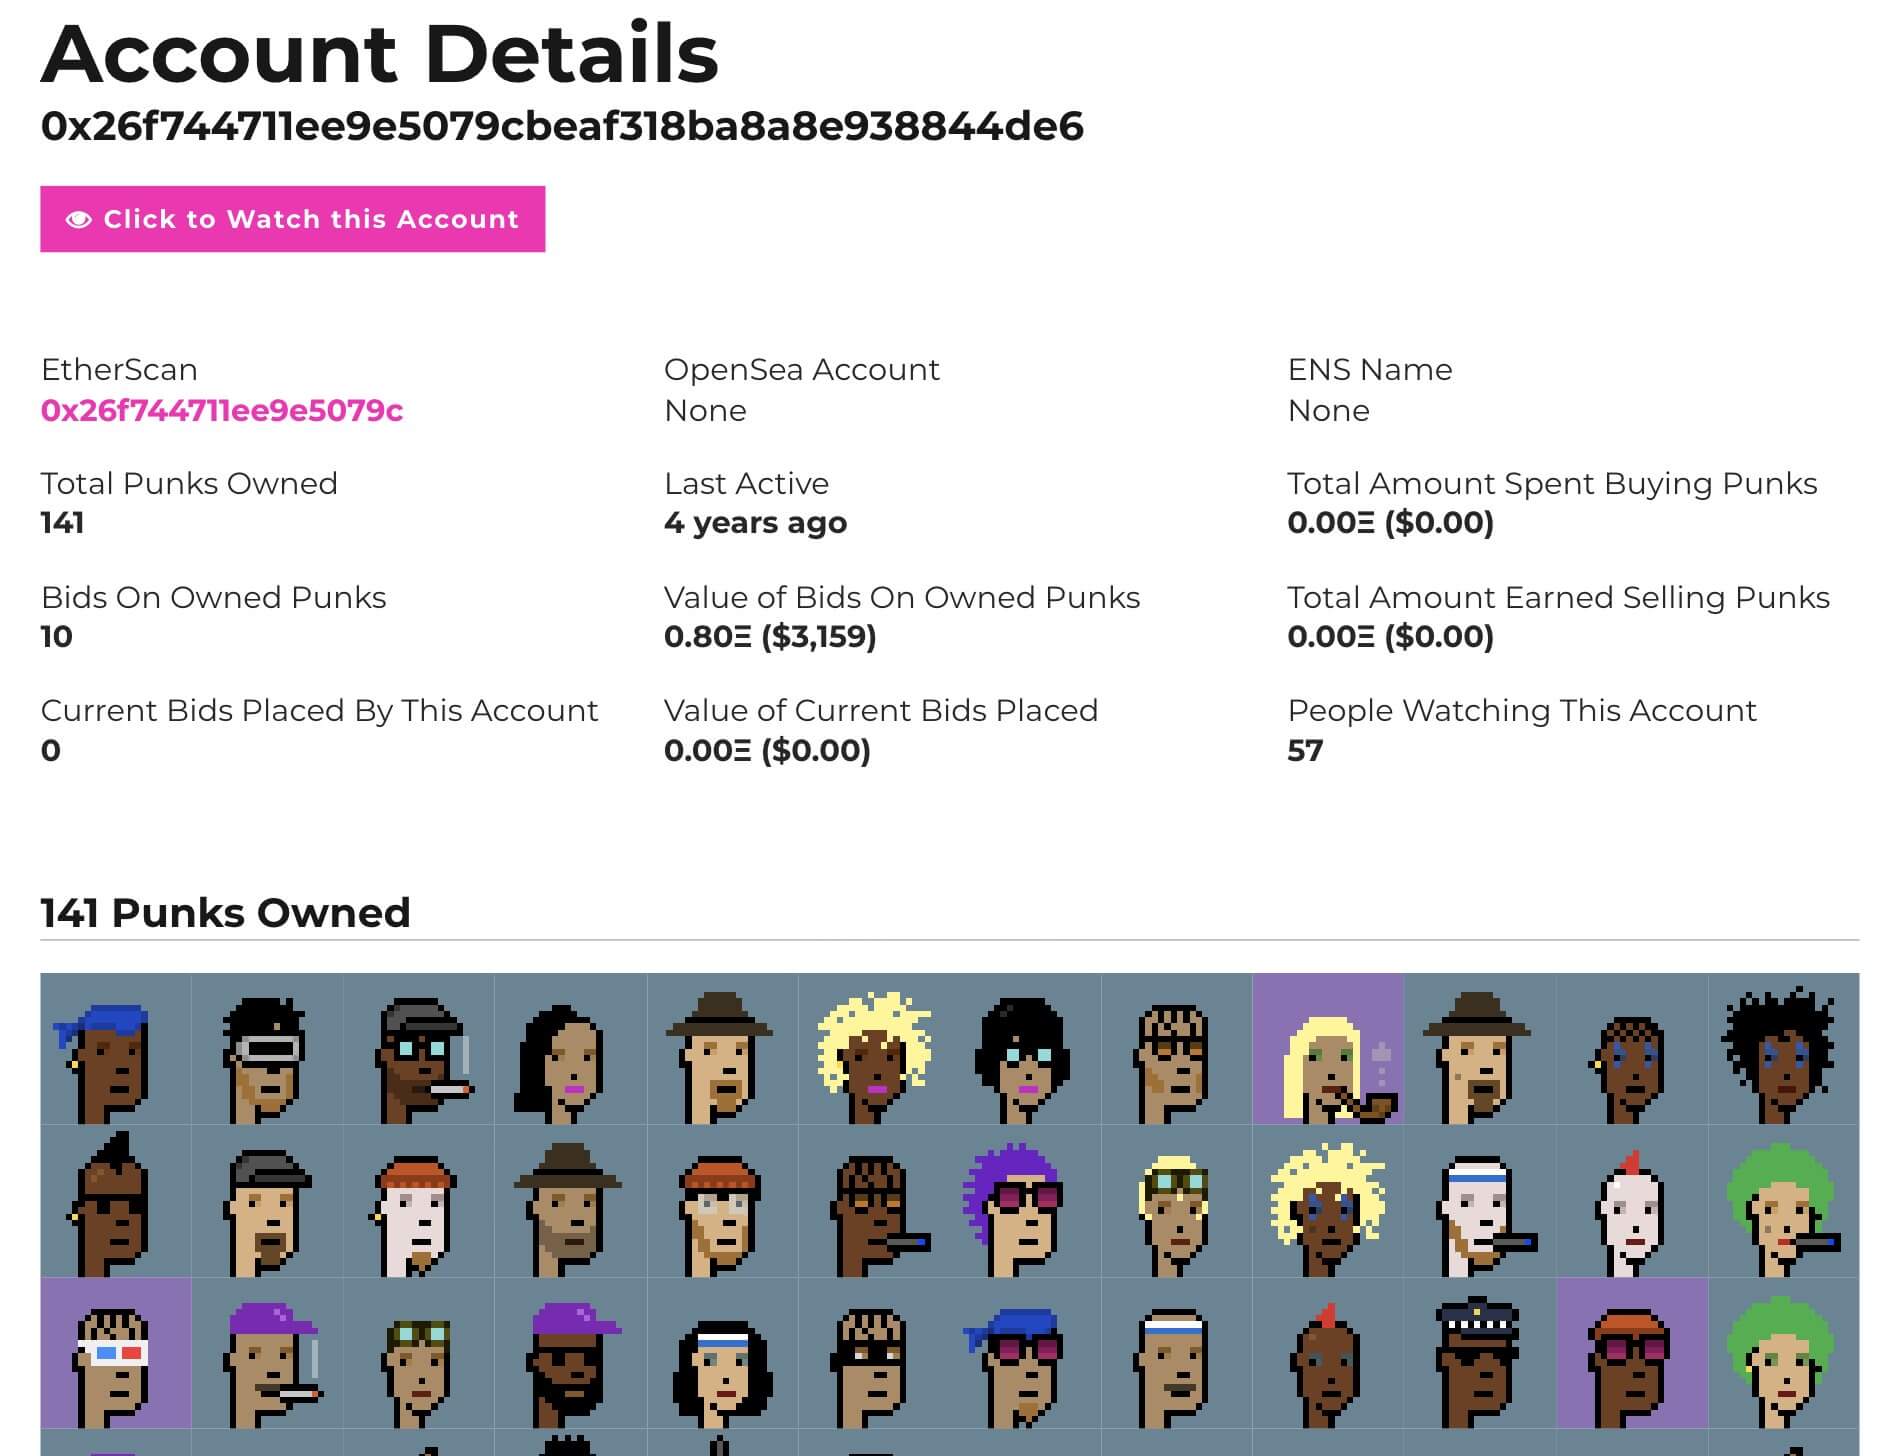 Lost(?) account holding 141 CryptoPunks.